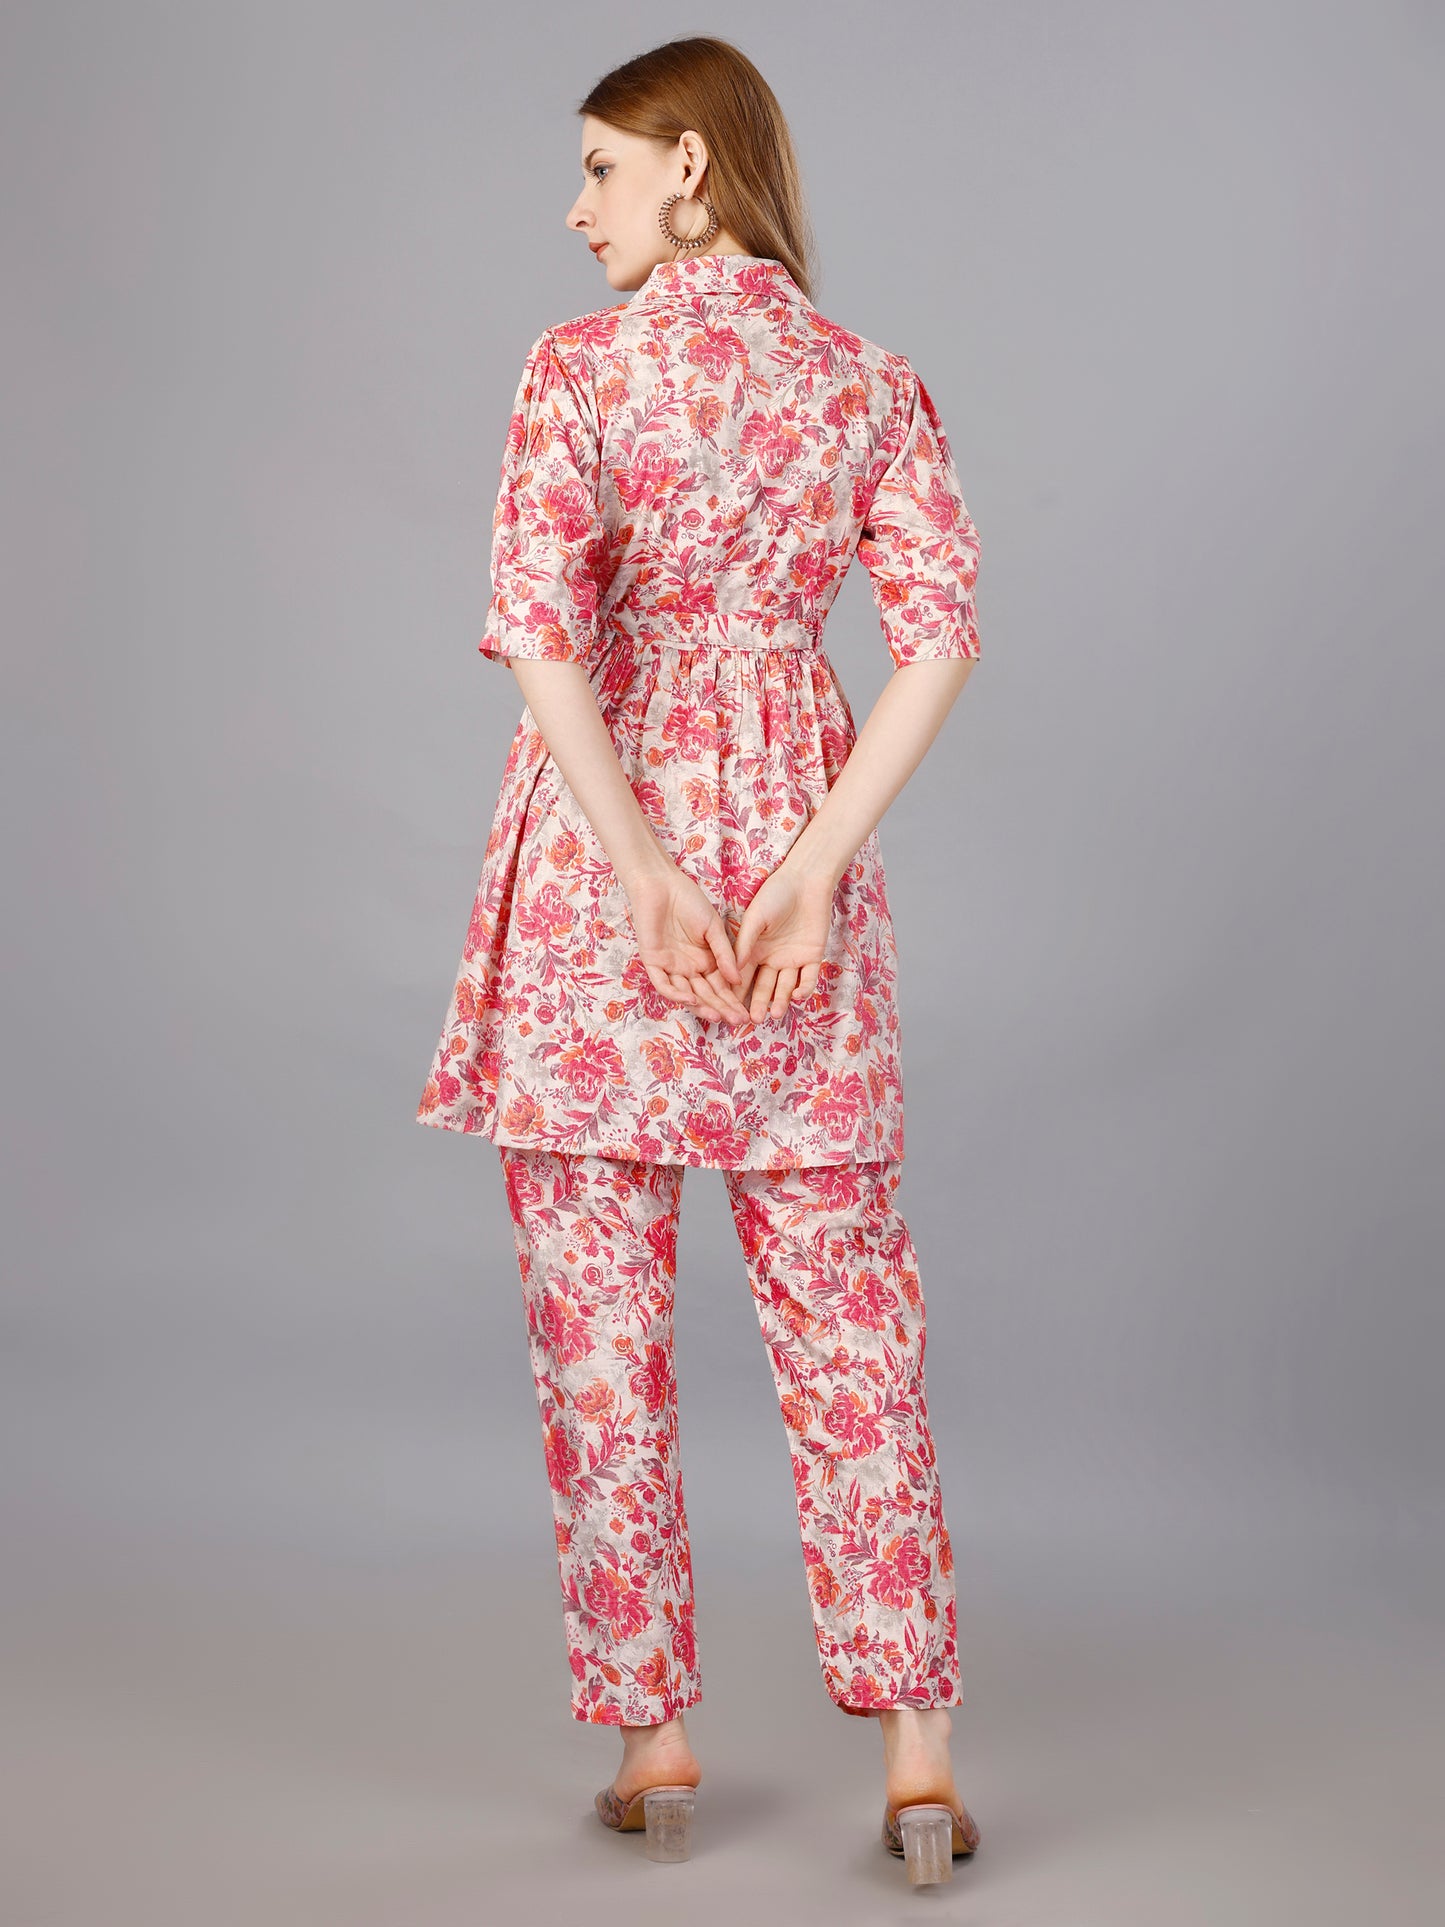 Charming Pink Floral Printed Cotton Co-Ord Set